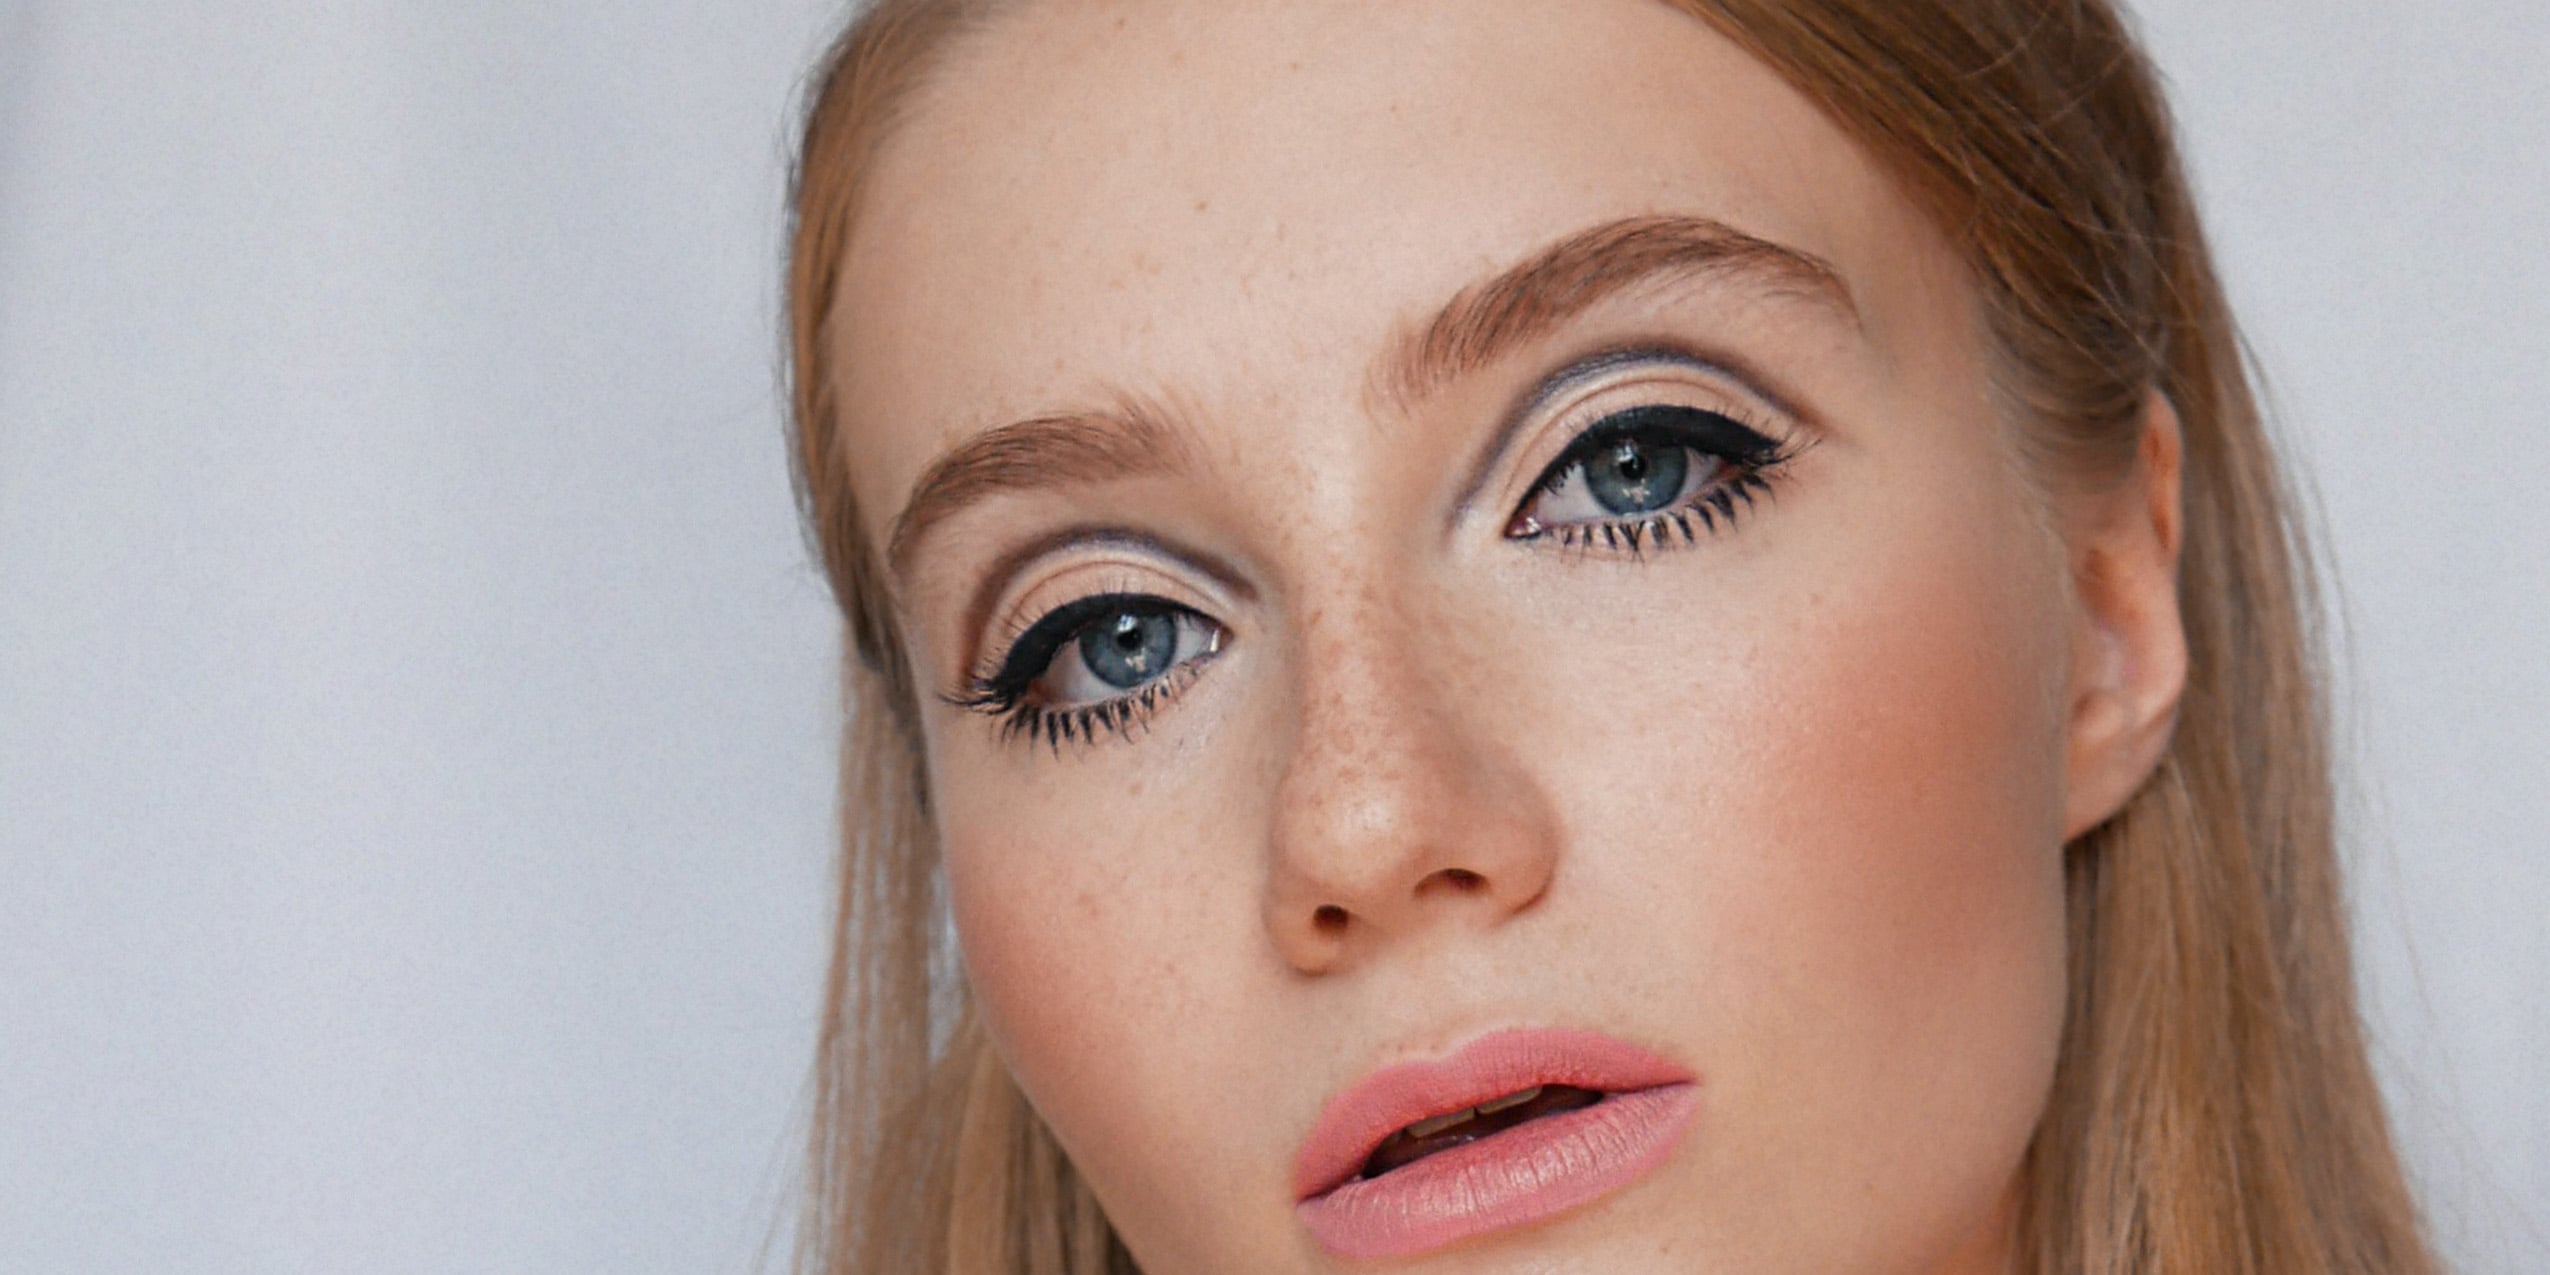 The '60s MakeUp Trend Is Huge So Here's The Inspo You Need